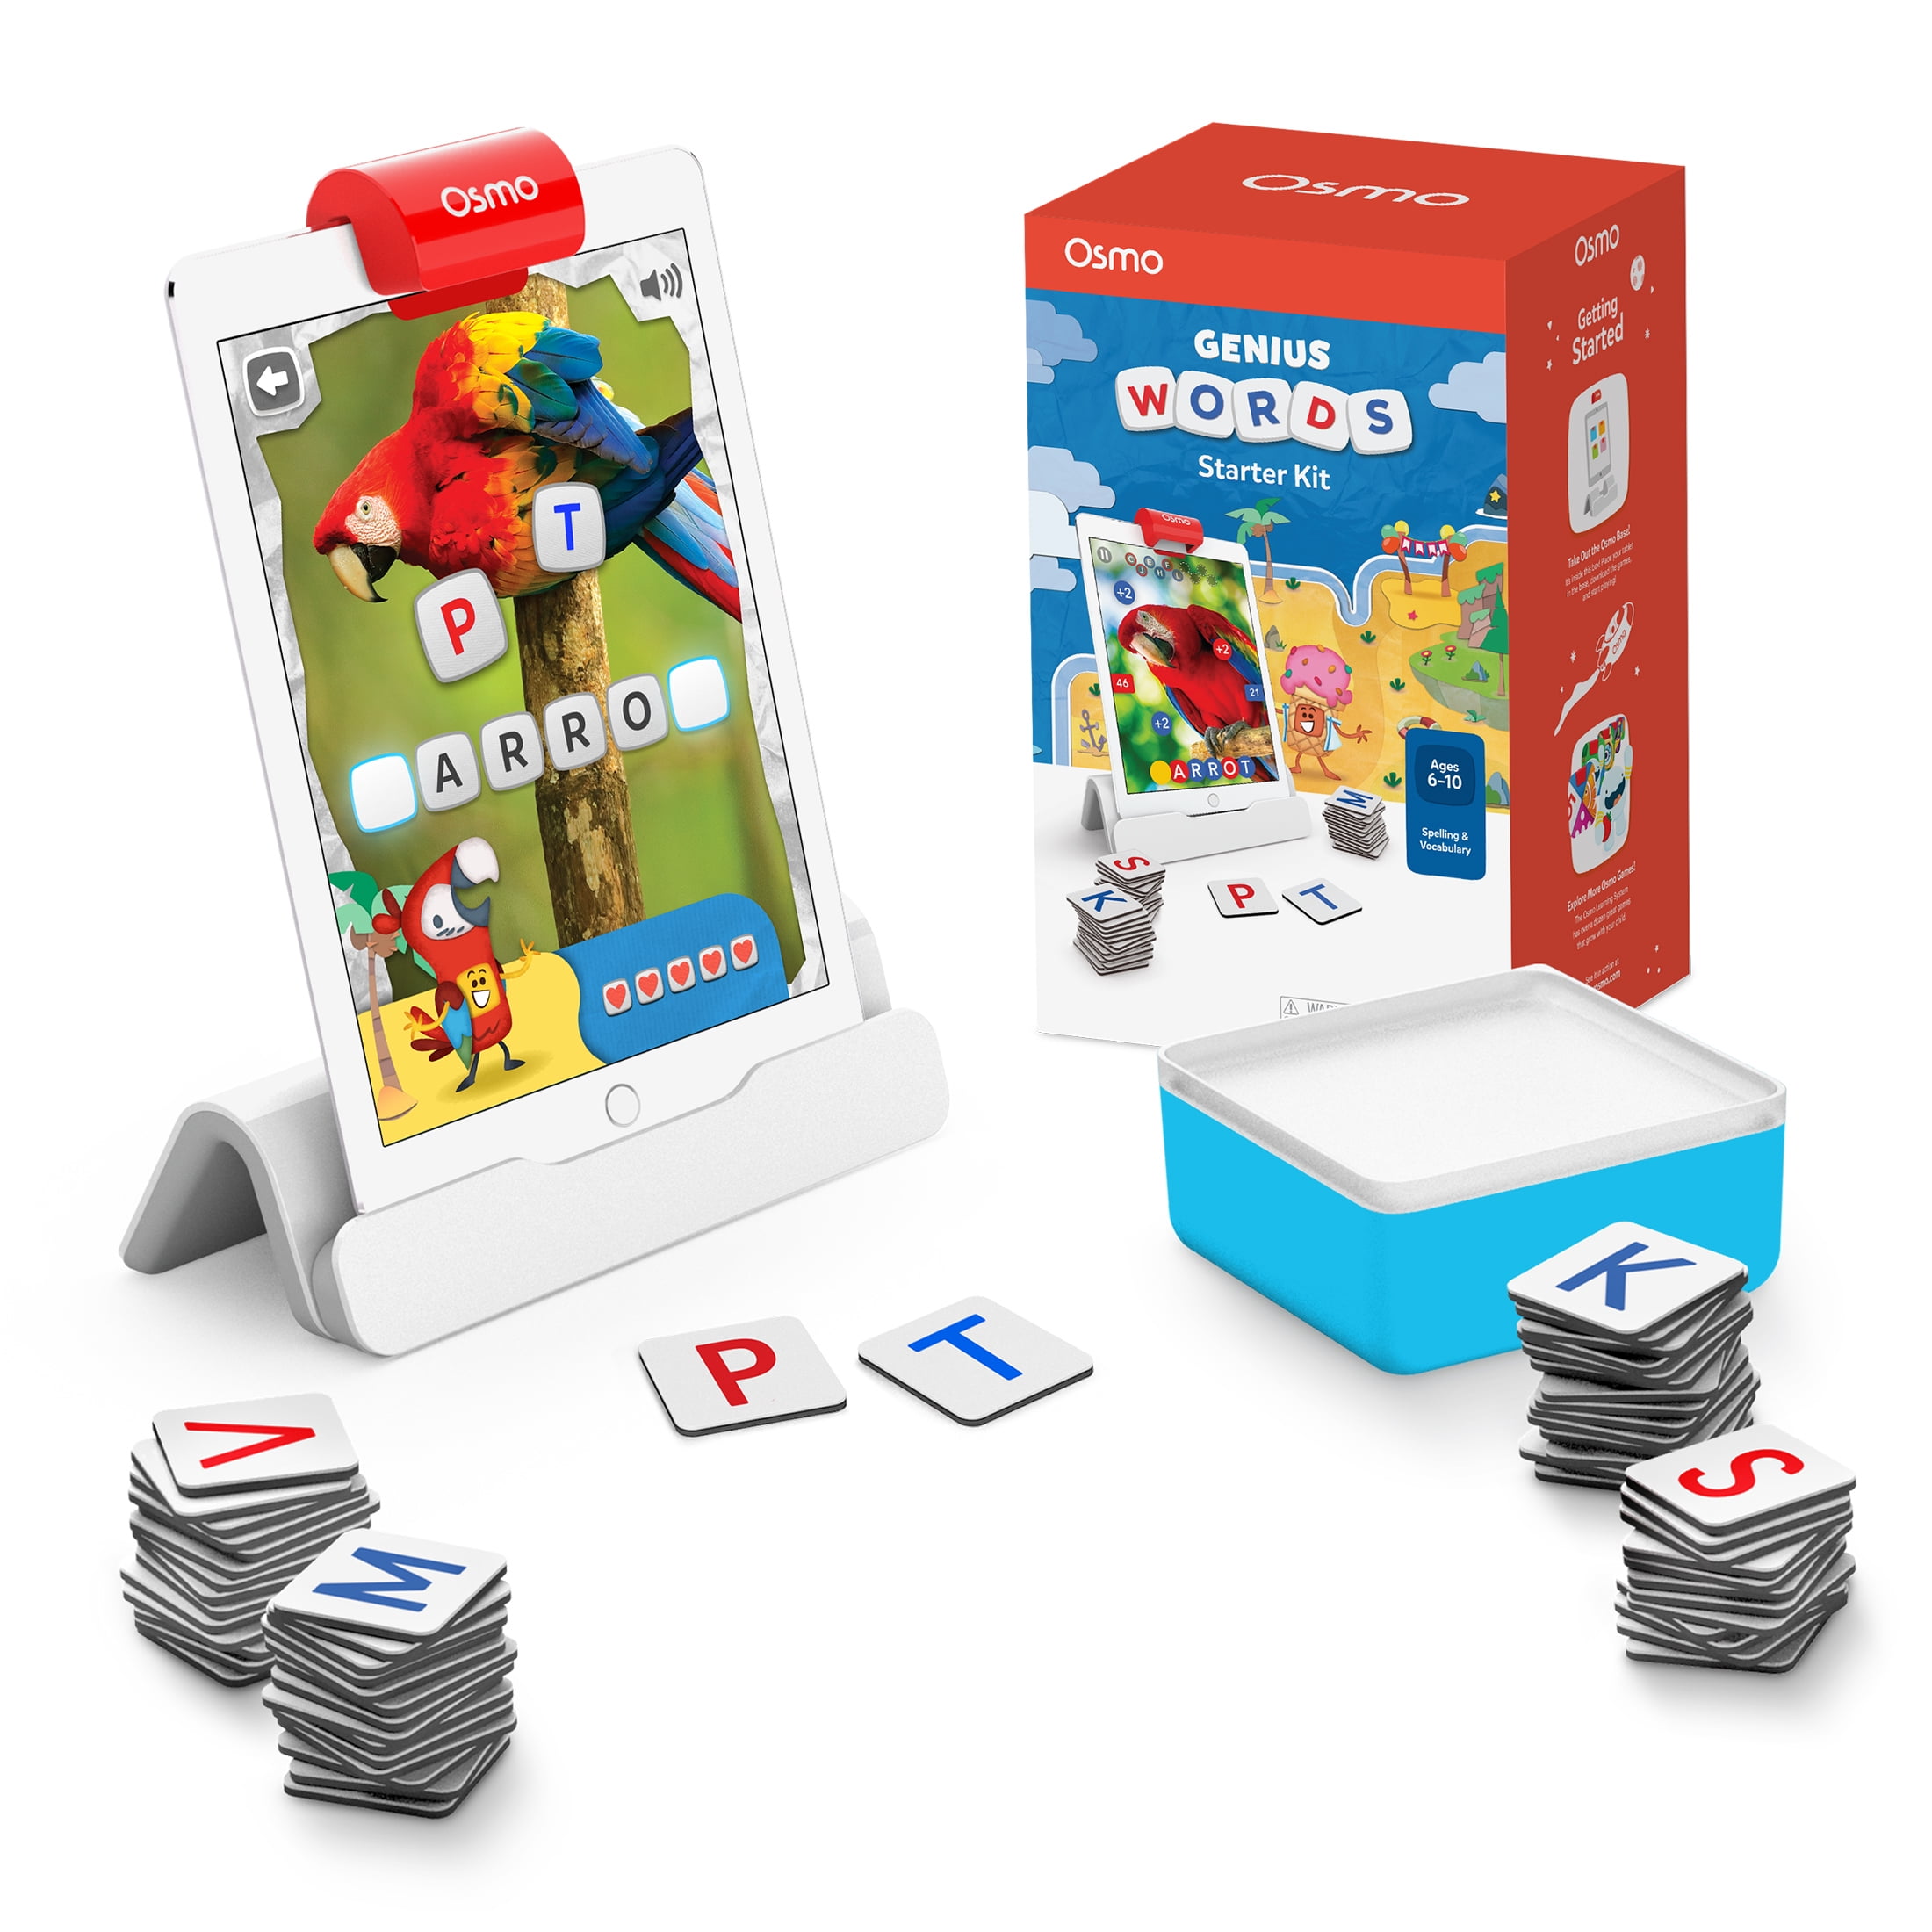 4 Educational Learning Games Little Genius Starter Kit for iPad Details about   Osmo Ages 